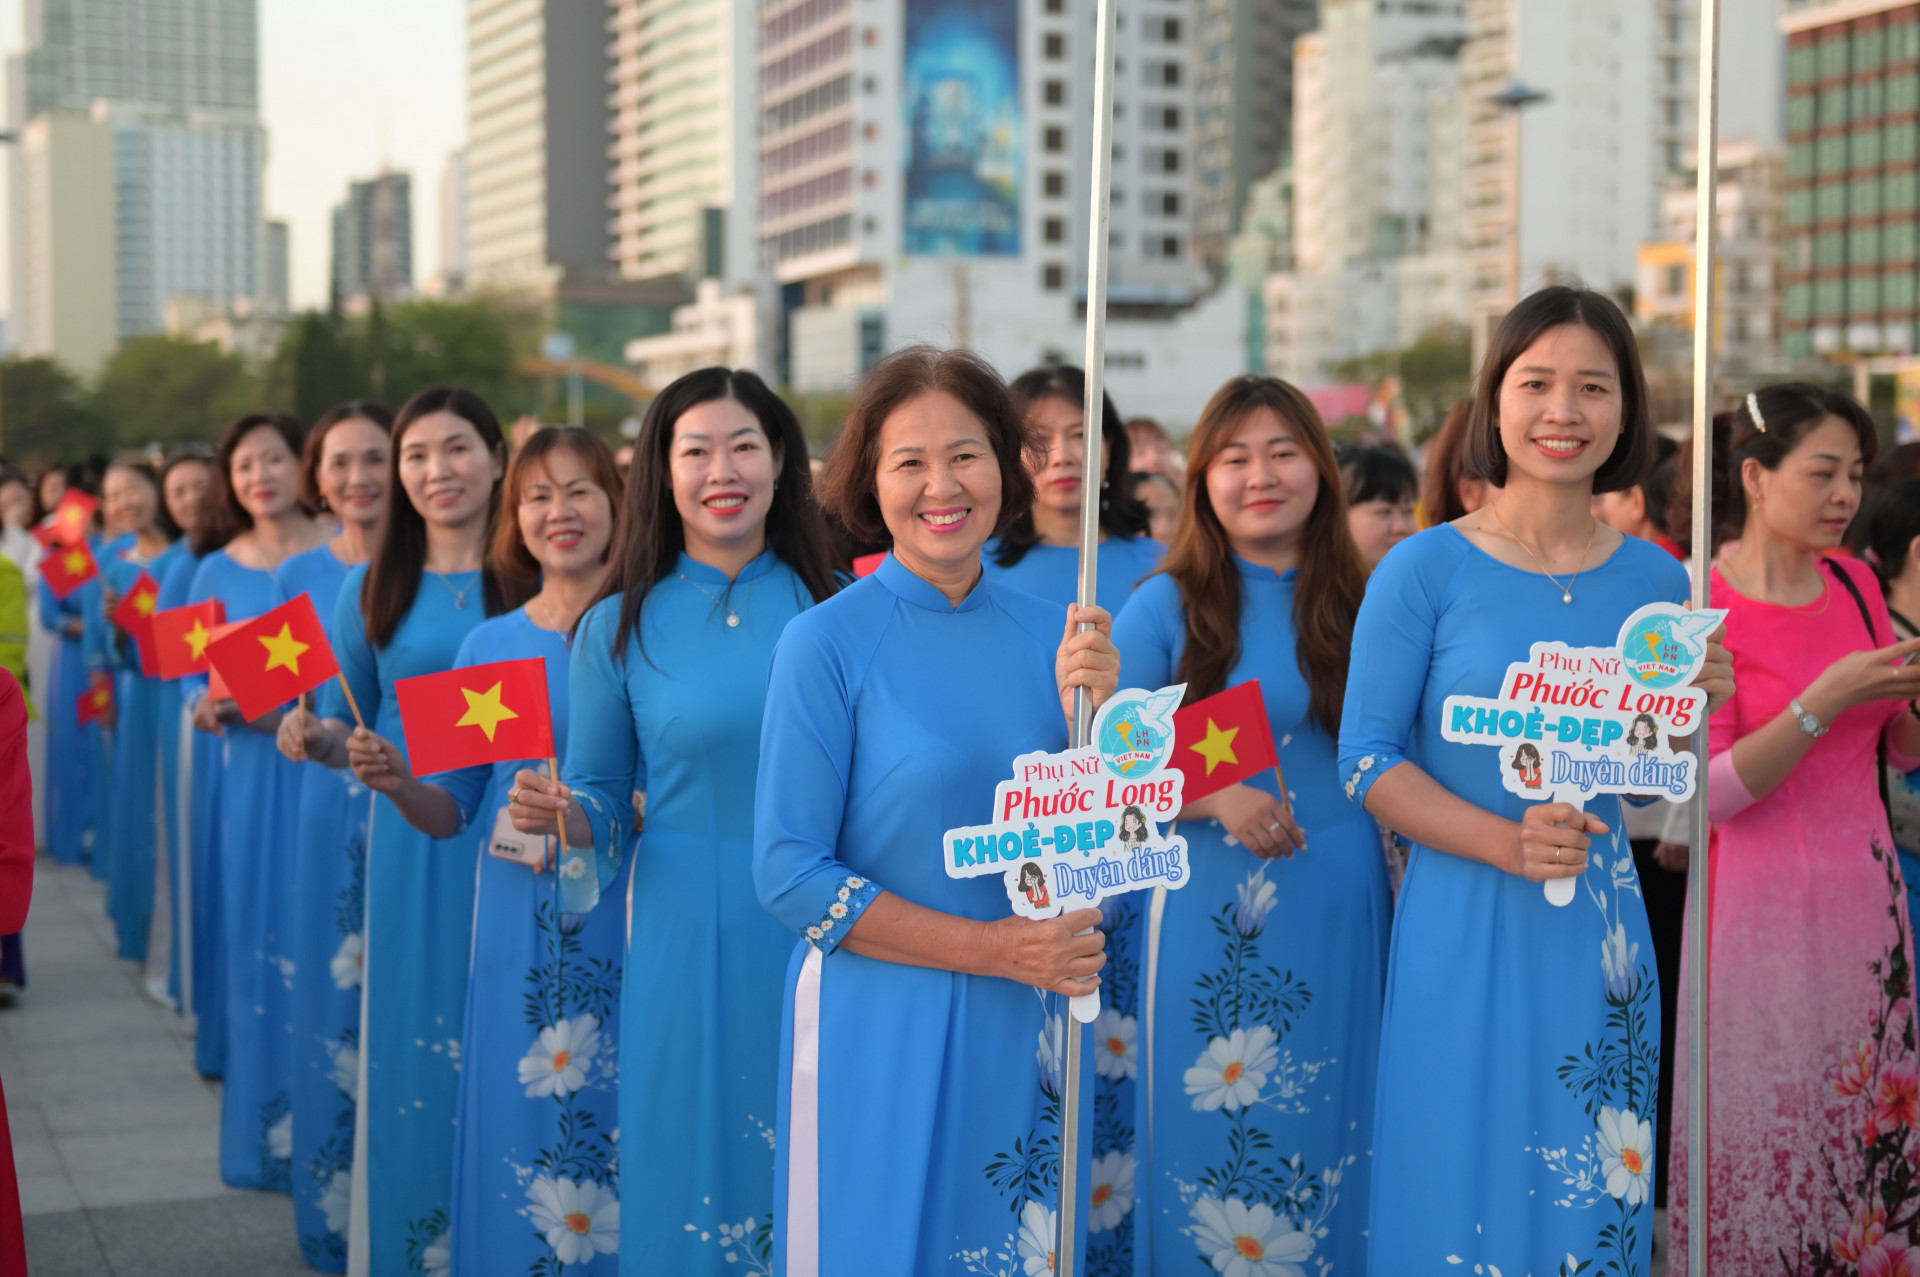 Members of Phuoc Long Ward Women’s Union joining the march